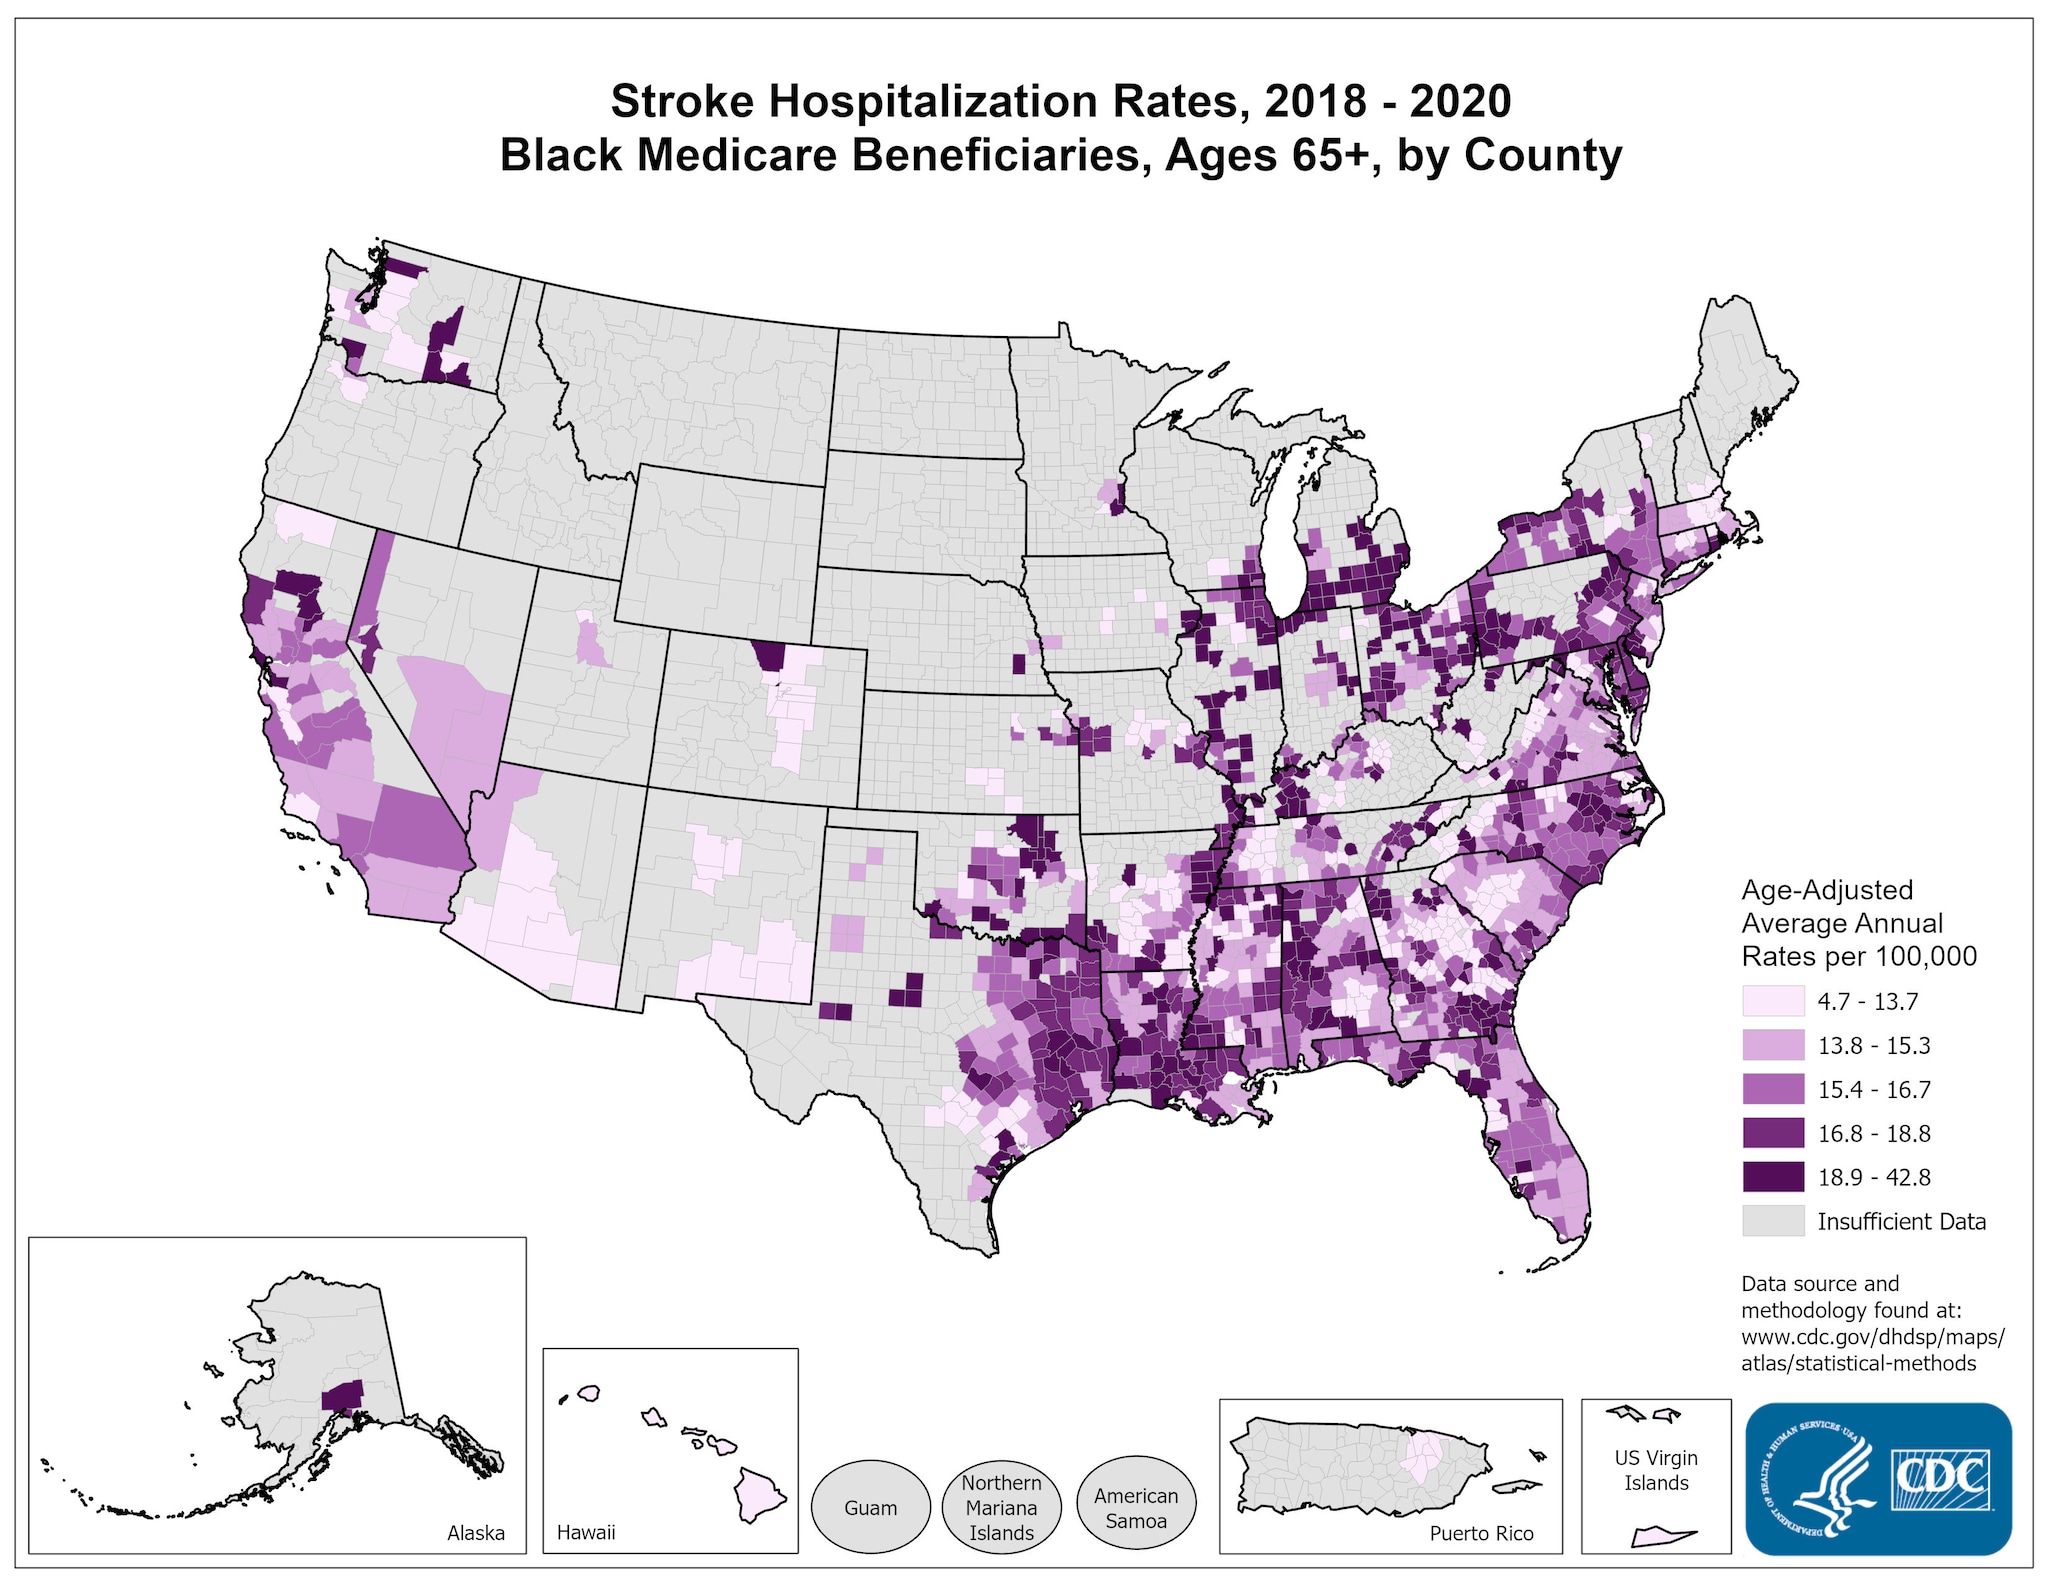 Stroke Hospitalization Rates for 2018 through 2020 for Blacks Aged 65 Years and Older by County